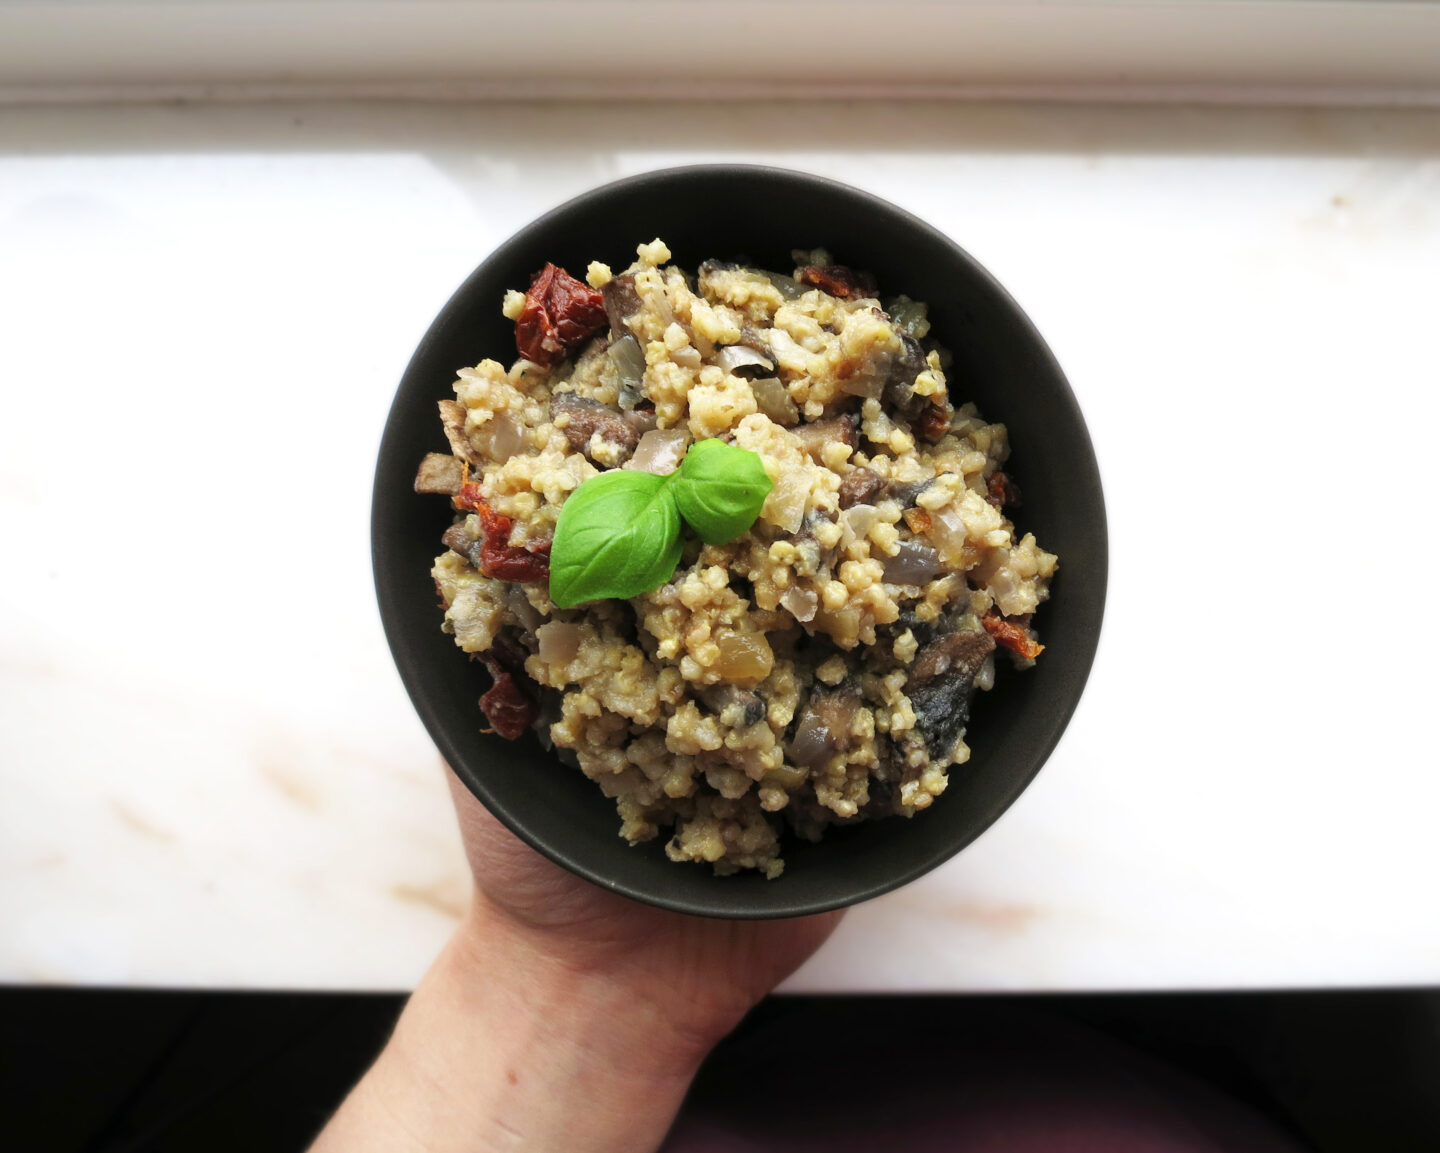 Authentic millet risotto with mushrooms and sun-dried tomatoes